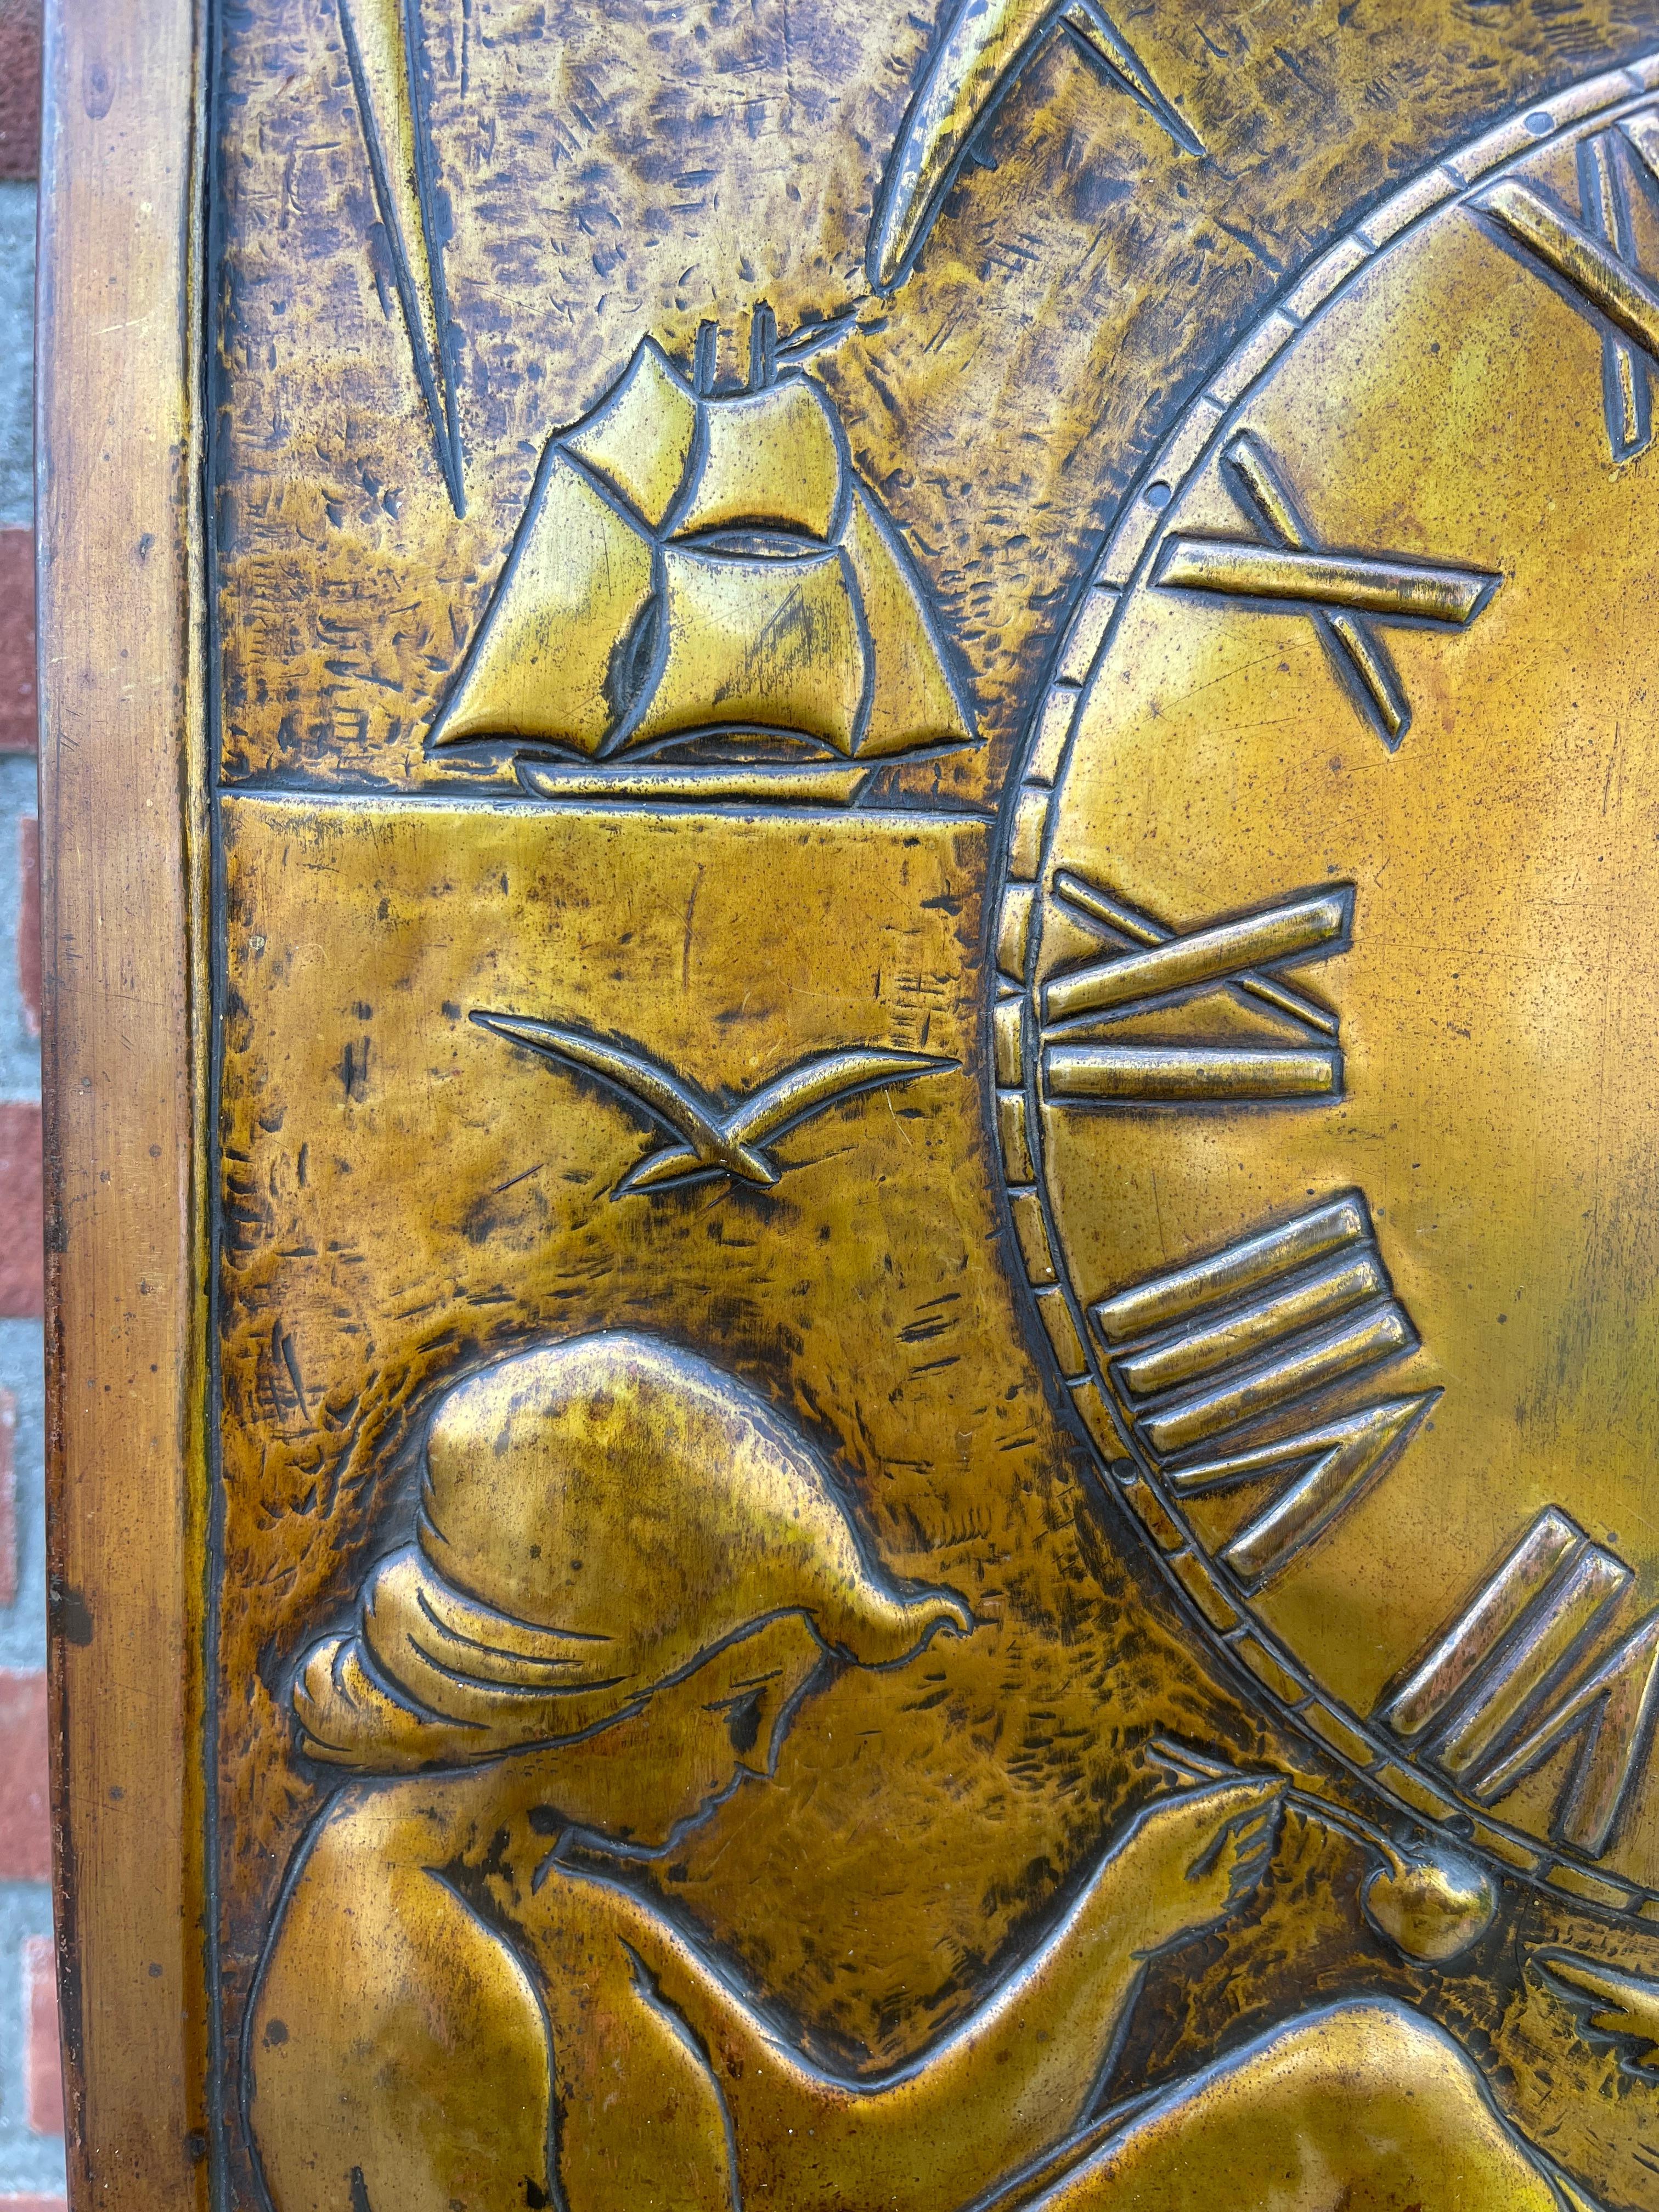 Brass Unique Arts & Crafts Wall Clock with Stunning Front Plaque Depicting Father Time